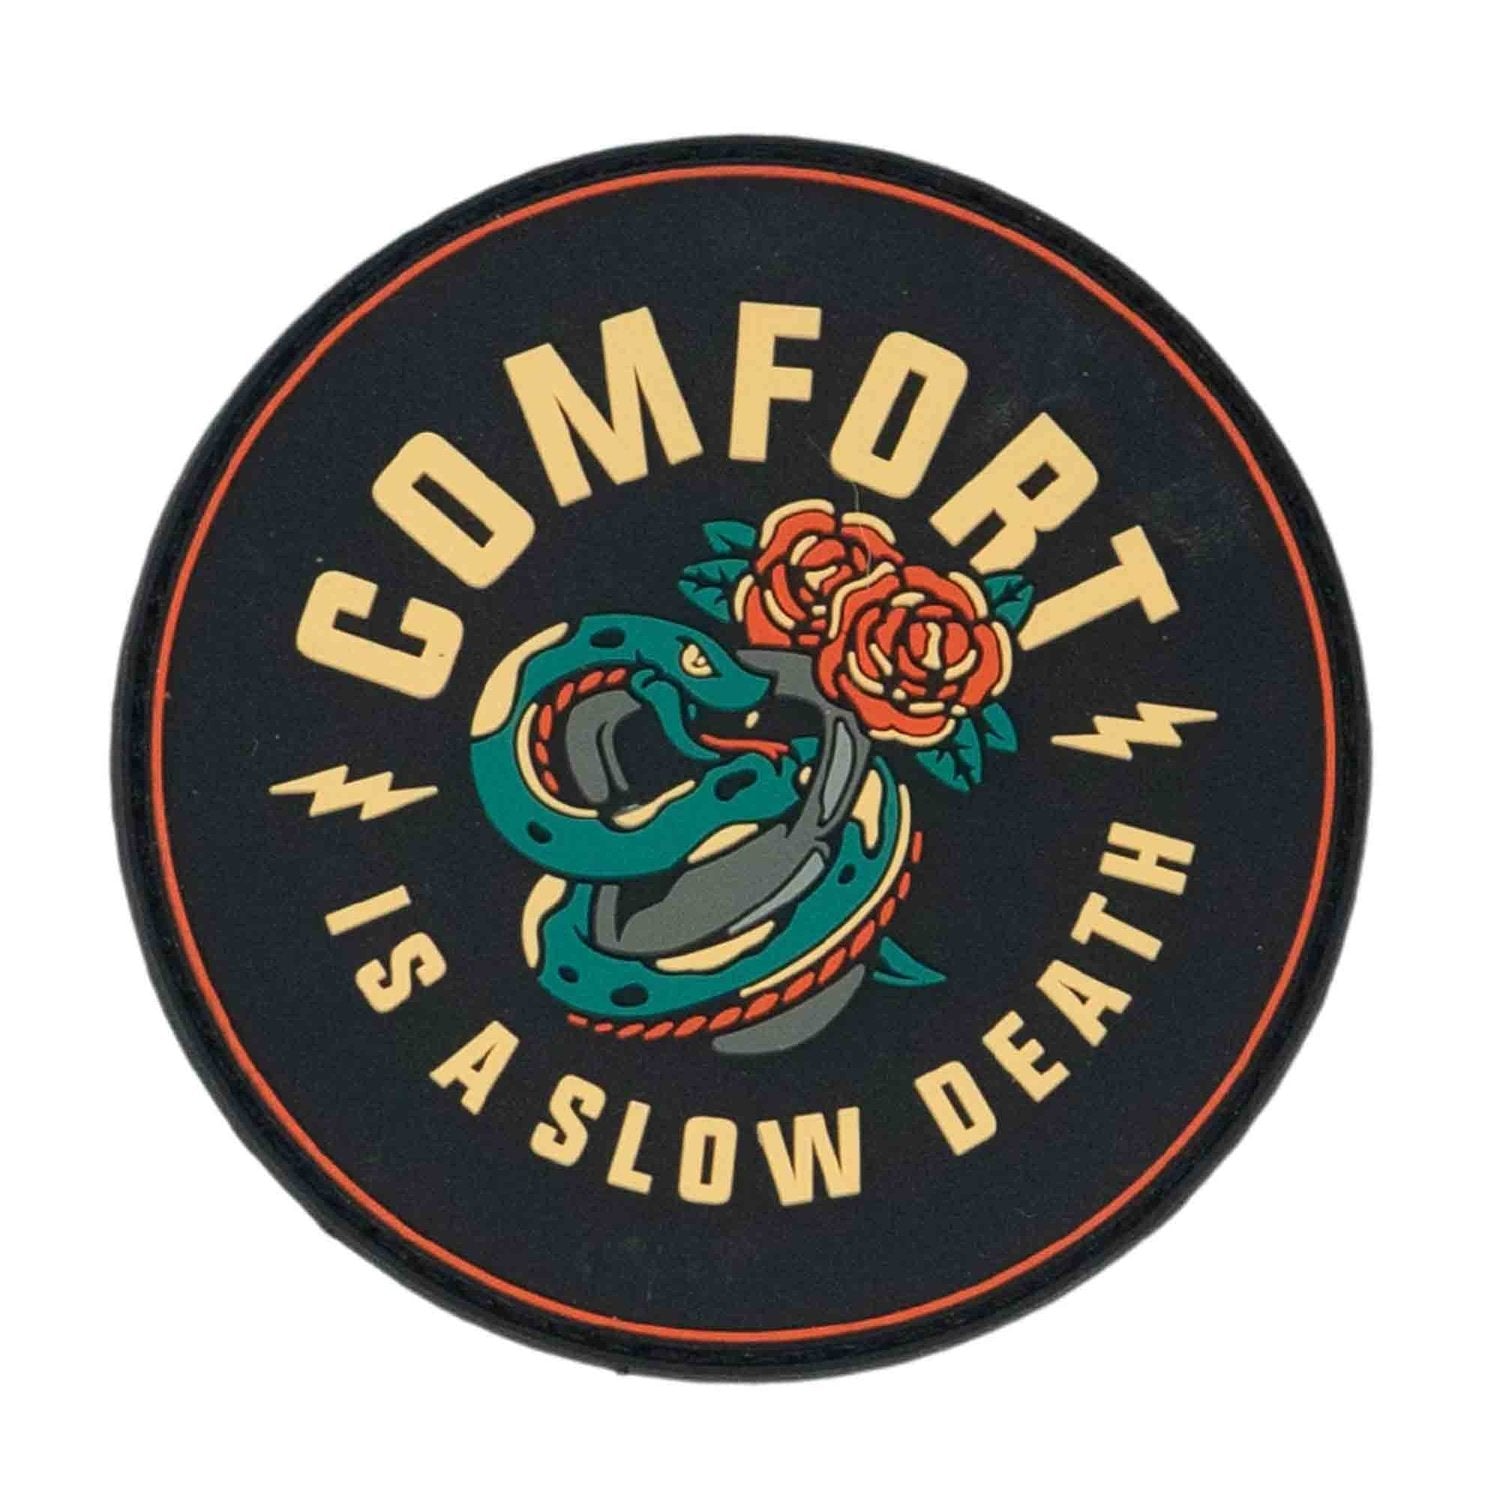 2POOD Comfort Is A Slow Death Velcro Patch kaufen bei HighPowered.ch